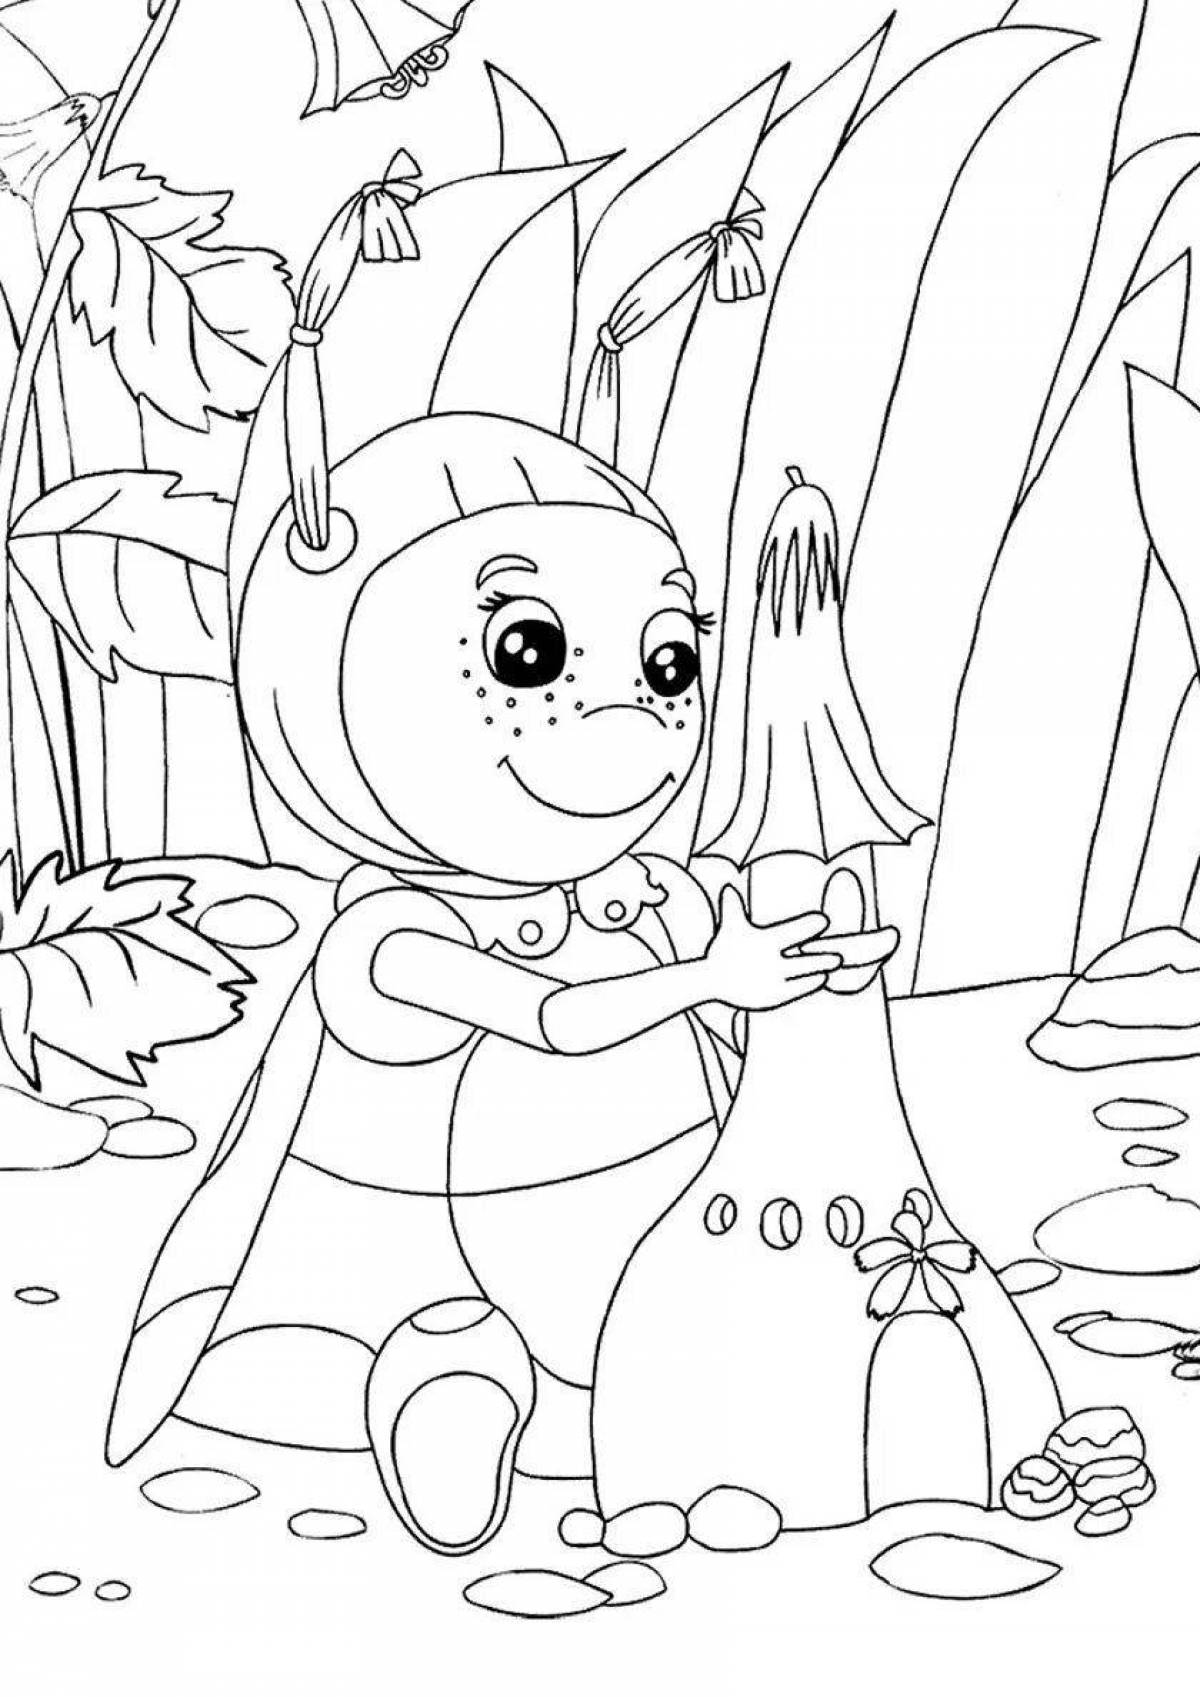 Luntik coloring book for children 6-7 years old